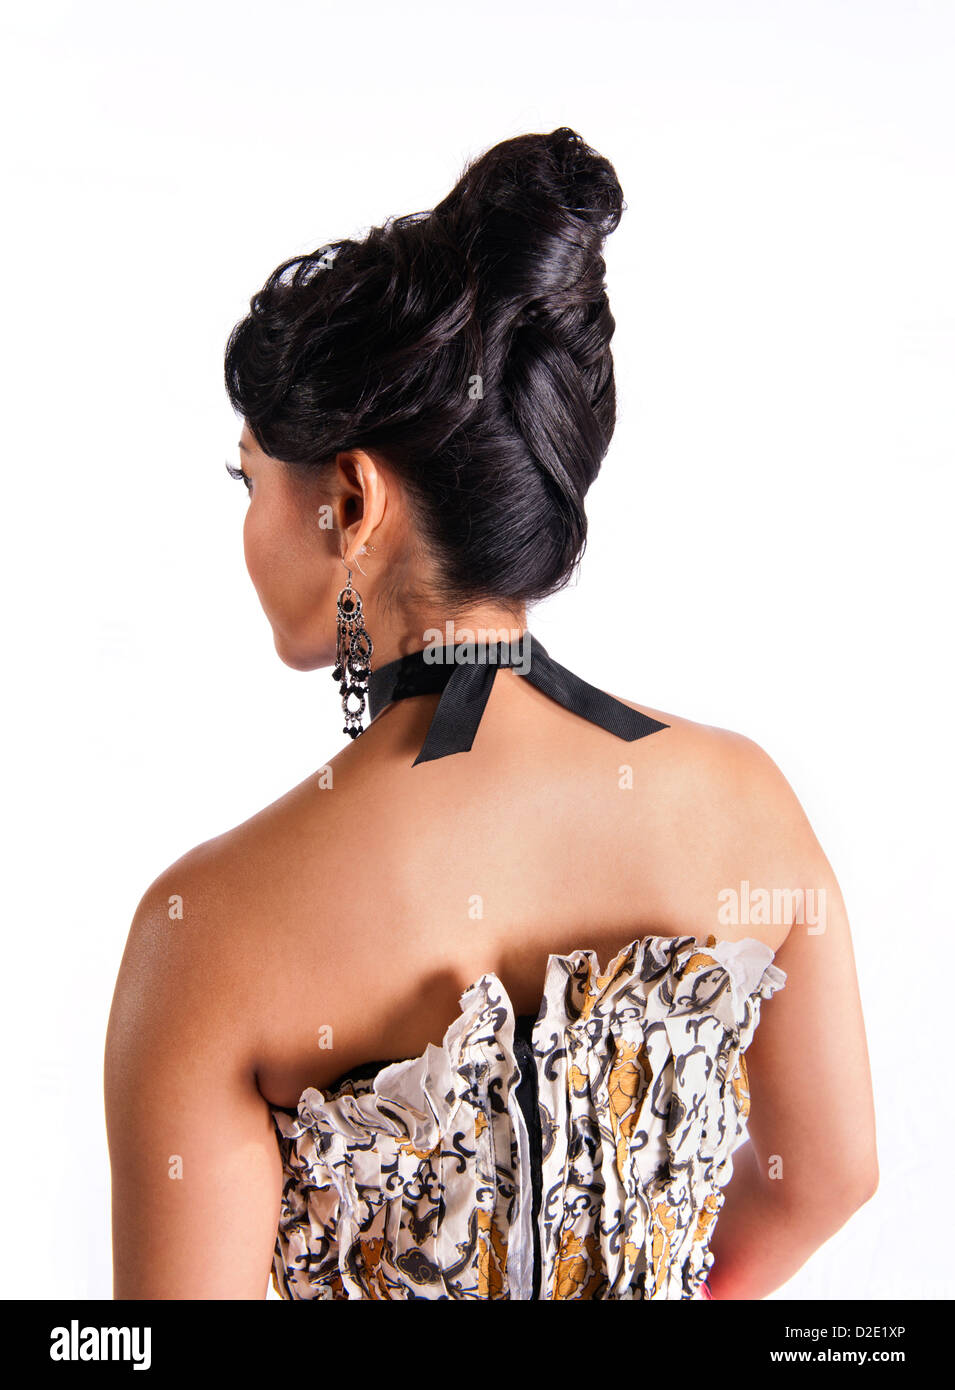 Asian woman showing hair style from the back Stock Photo